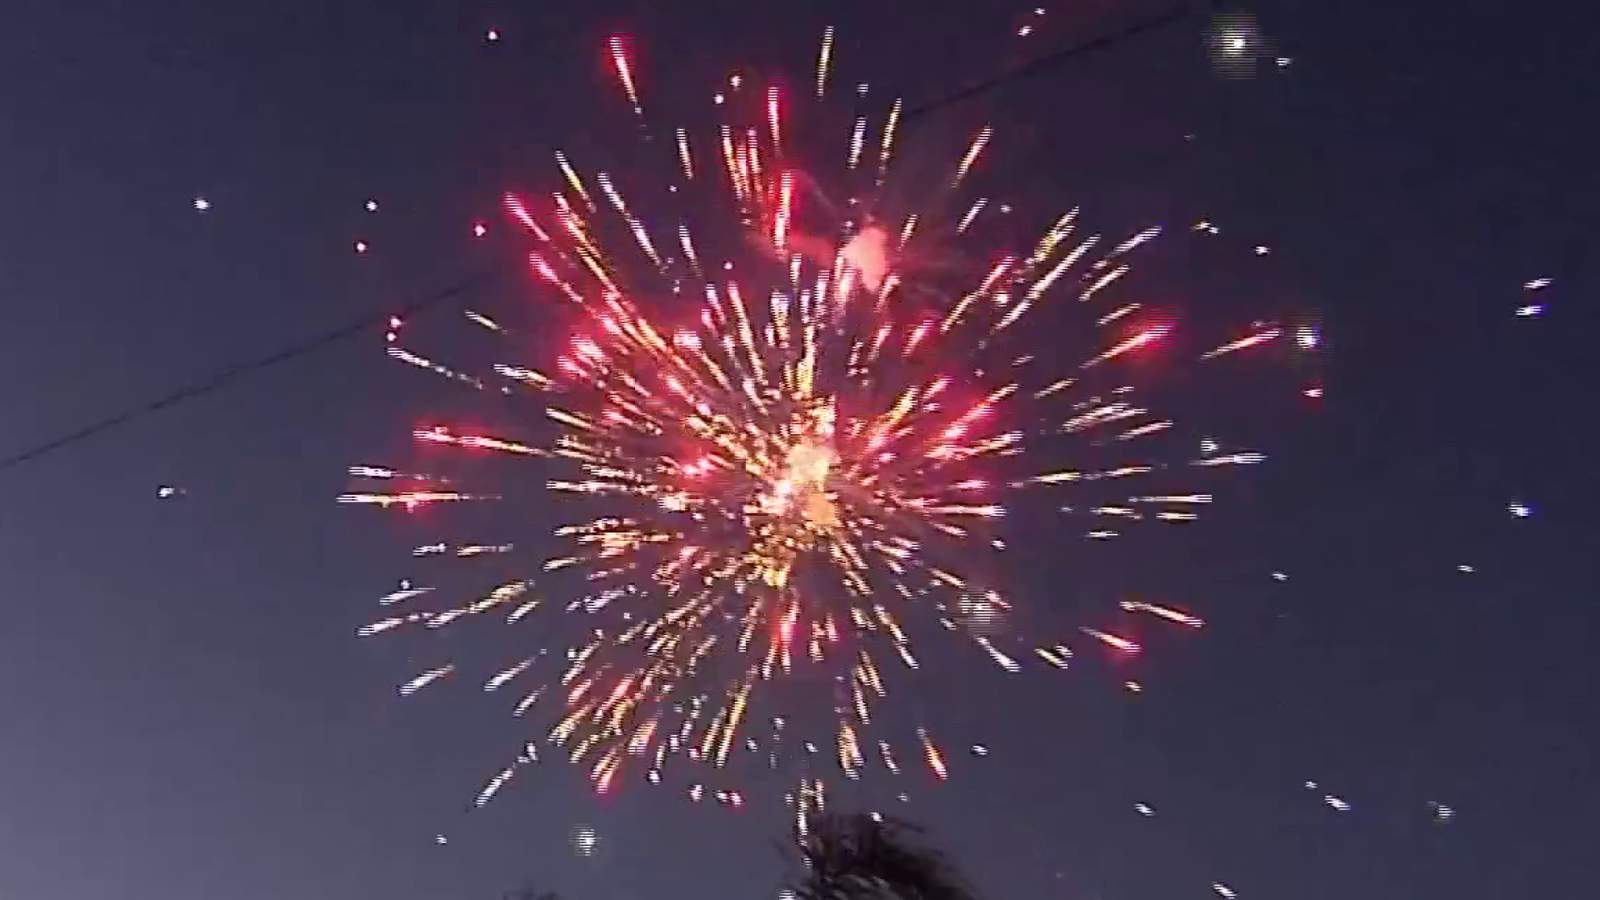 Keep the kids as far away as you can: Carilions tips for child safety around fireworks